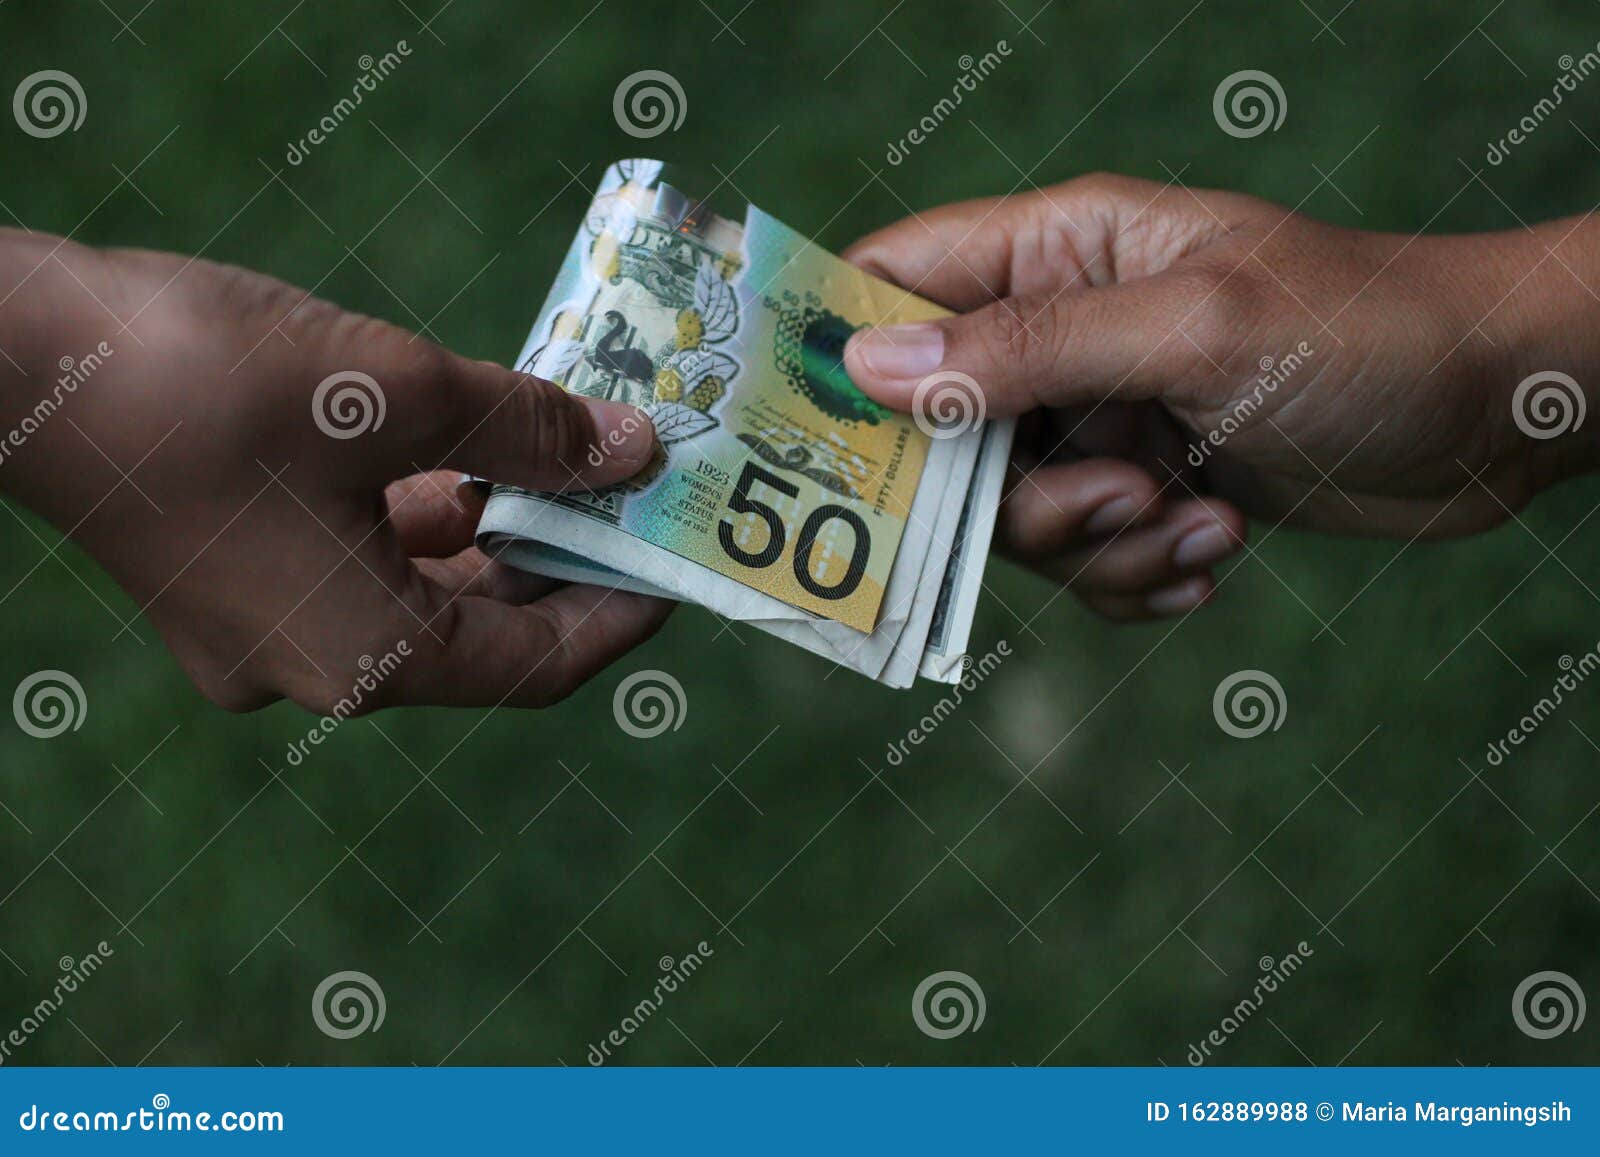 Paper Money in Hand. Two Hands of Young Woman or Man AUD Australian Dollar on Green Background. Pay Day Concept. Stock Photo - Image of budgeting: 162889988